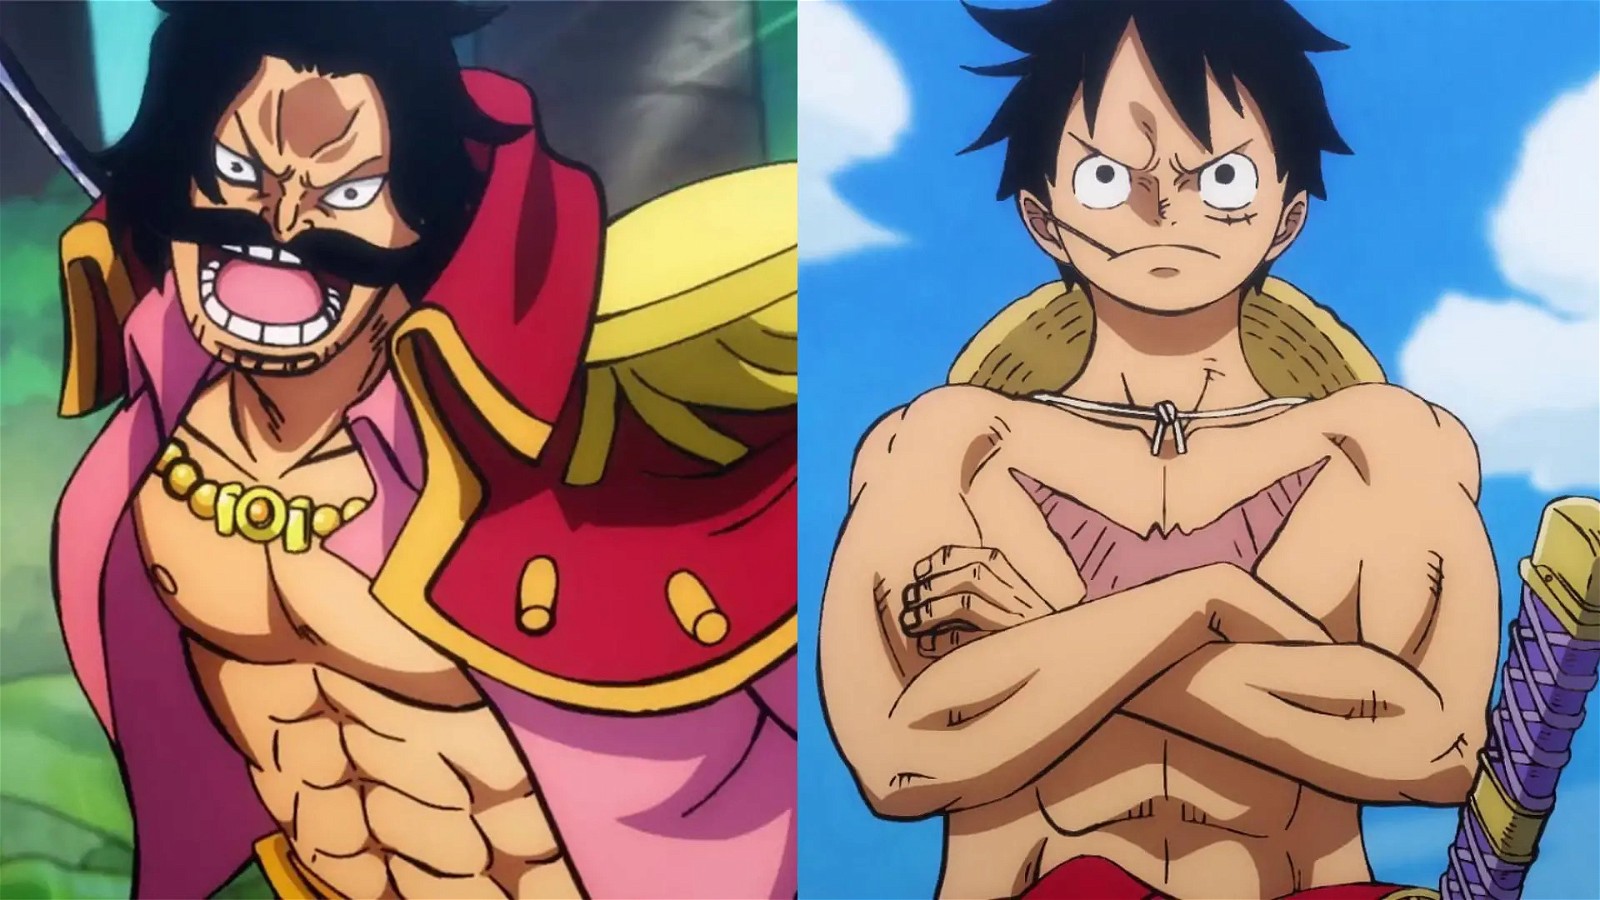 One Piece: All Haki Types and Its Subforms (Explained)